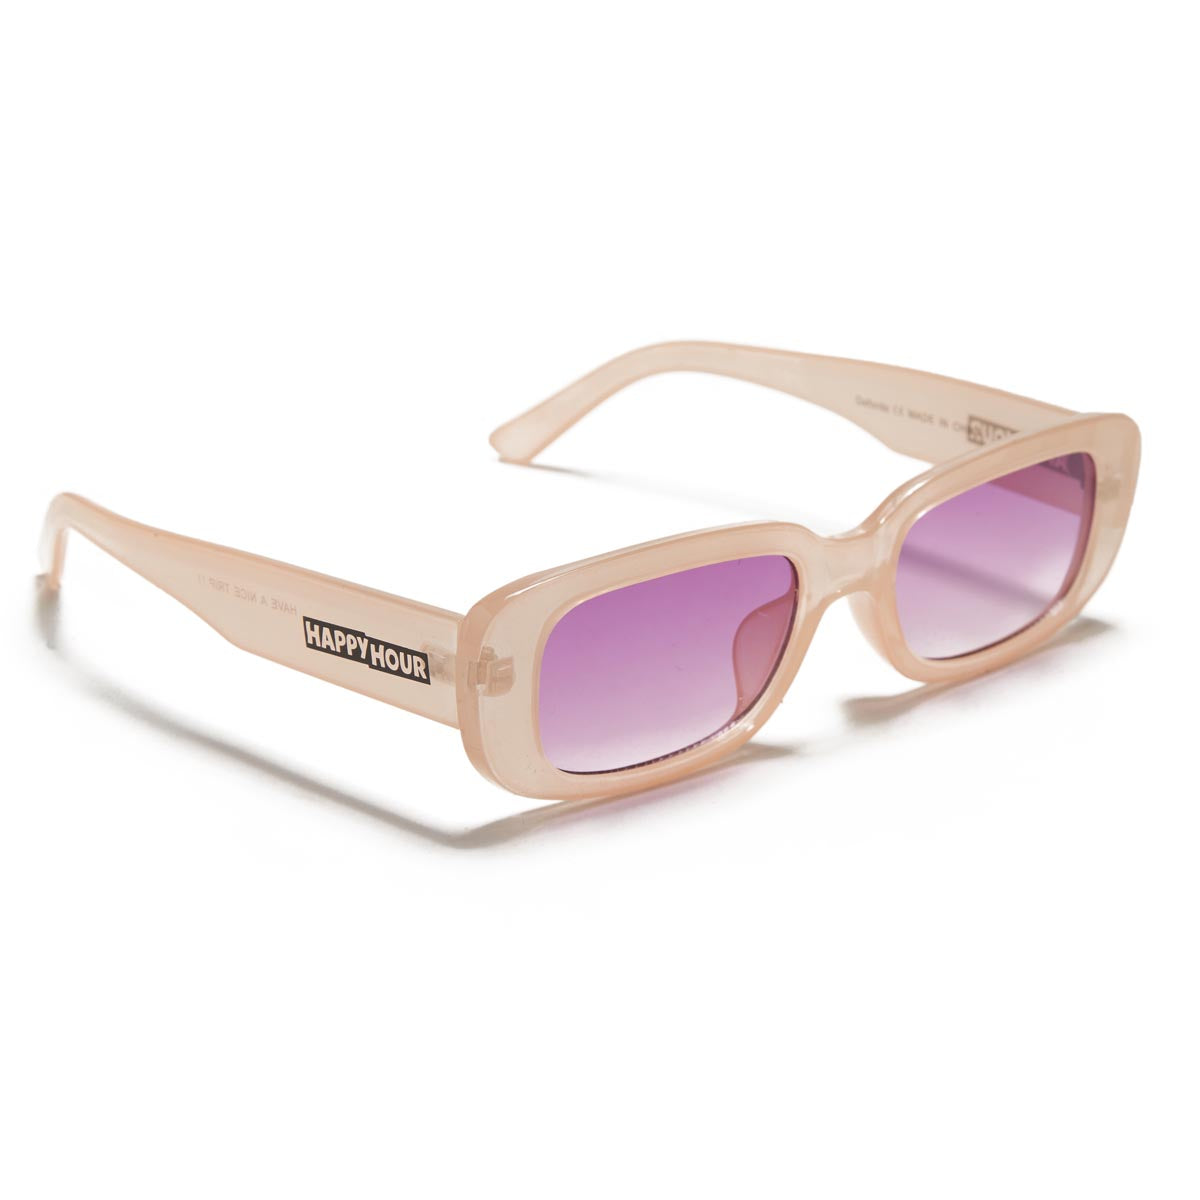 Happy Hour Oxford Sunglasses - Peach Party image 1